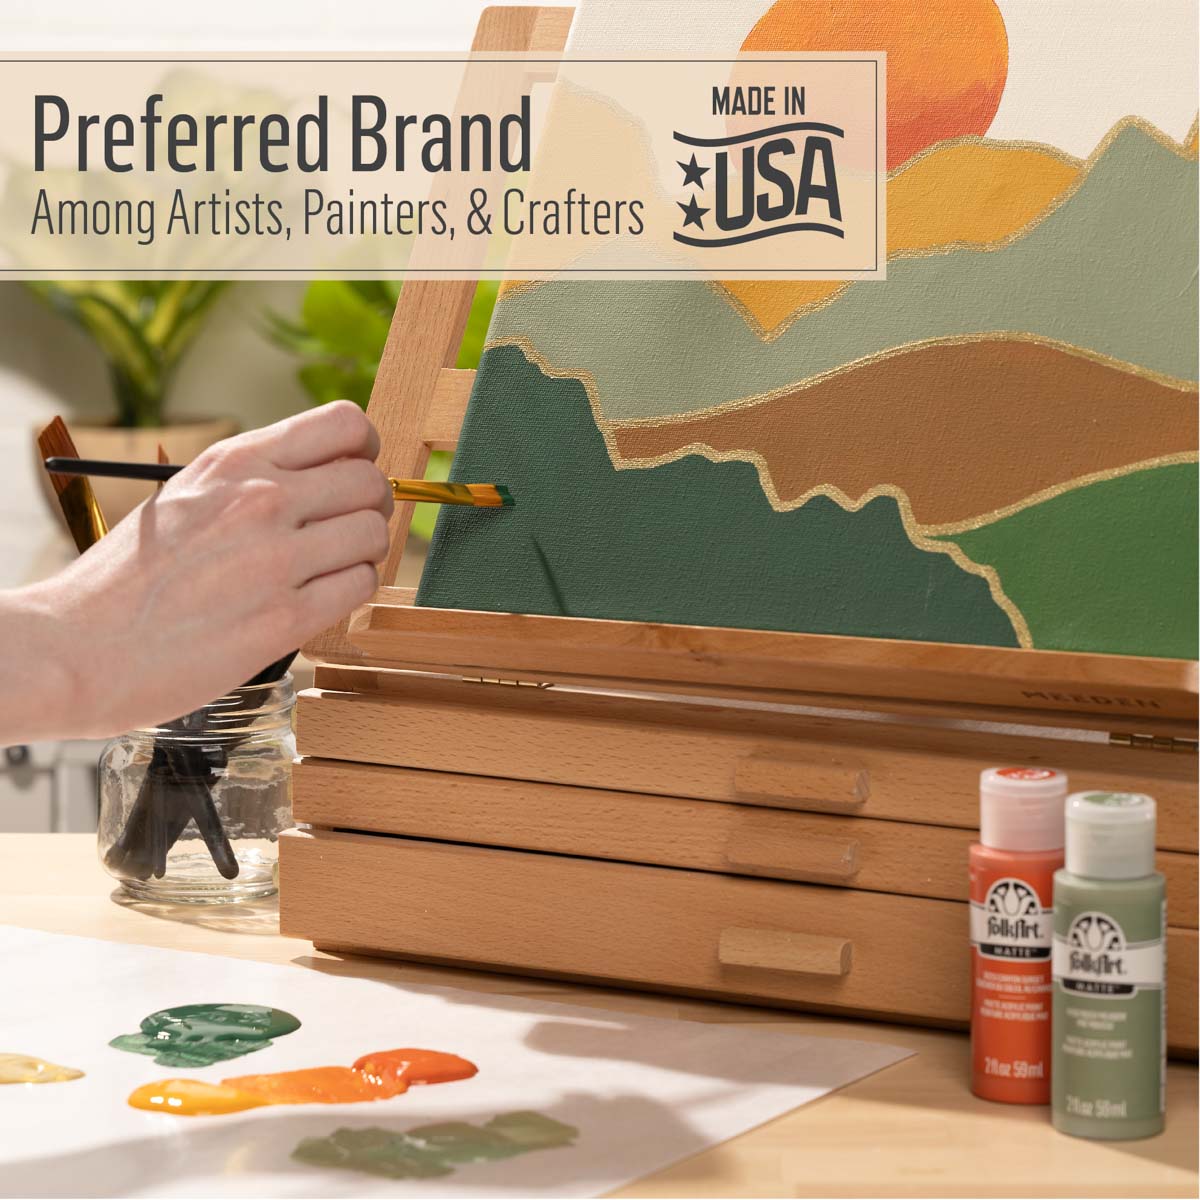 Test Report: PLAID FolkArt Acrylic Paint – The Makers Resource Shop